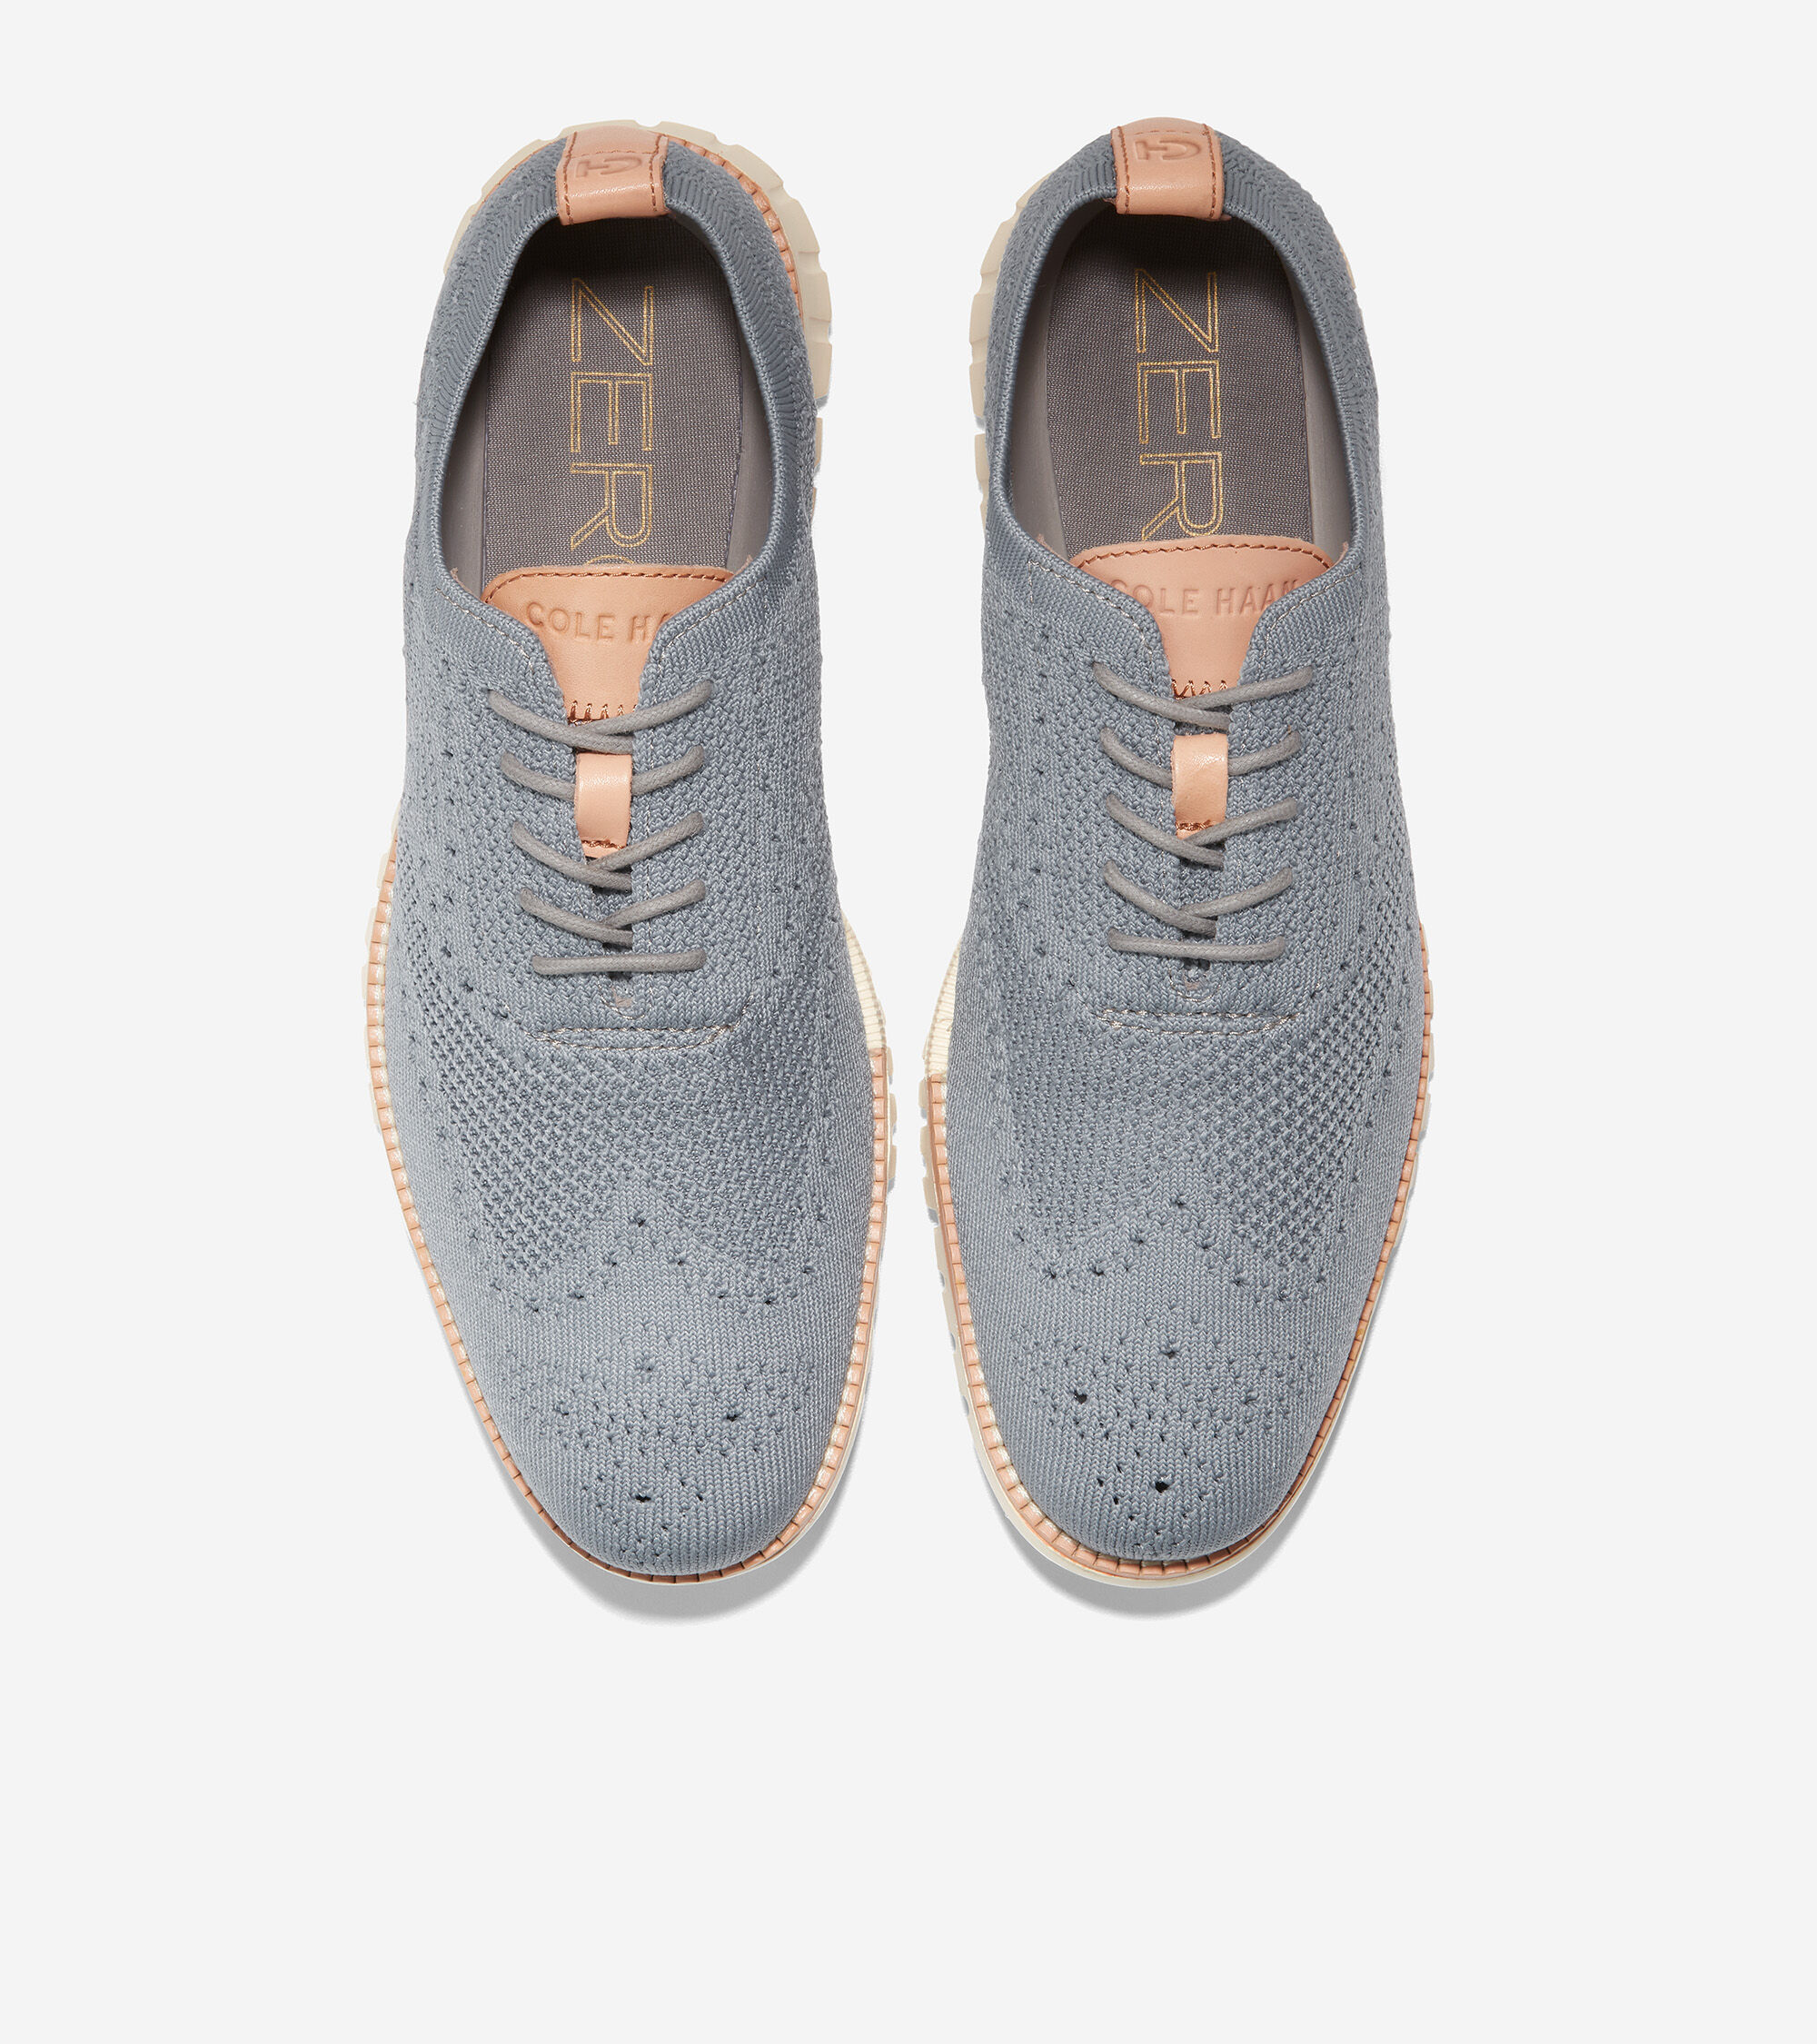 cleaning cole haan stitchlite